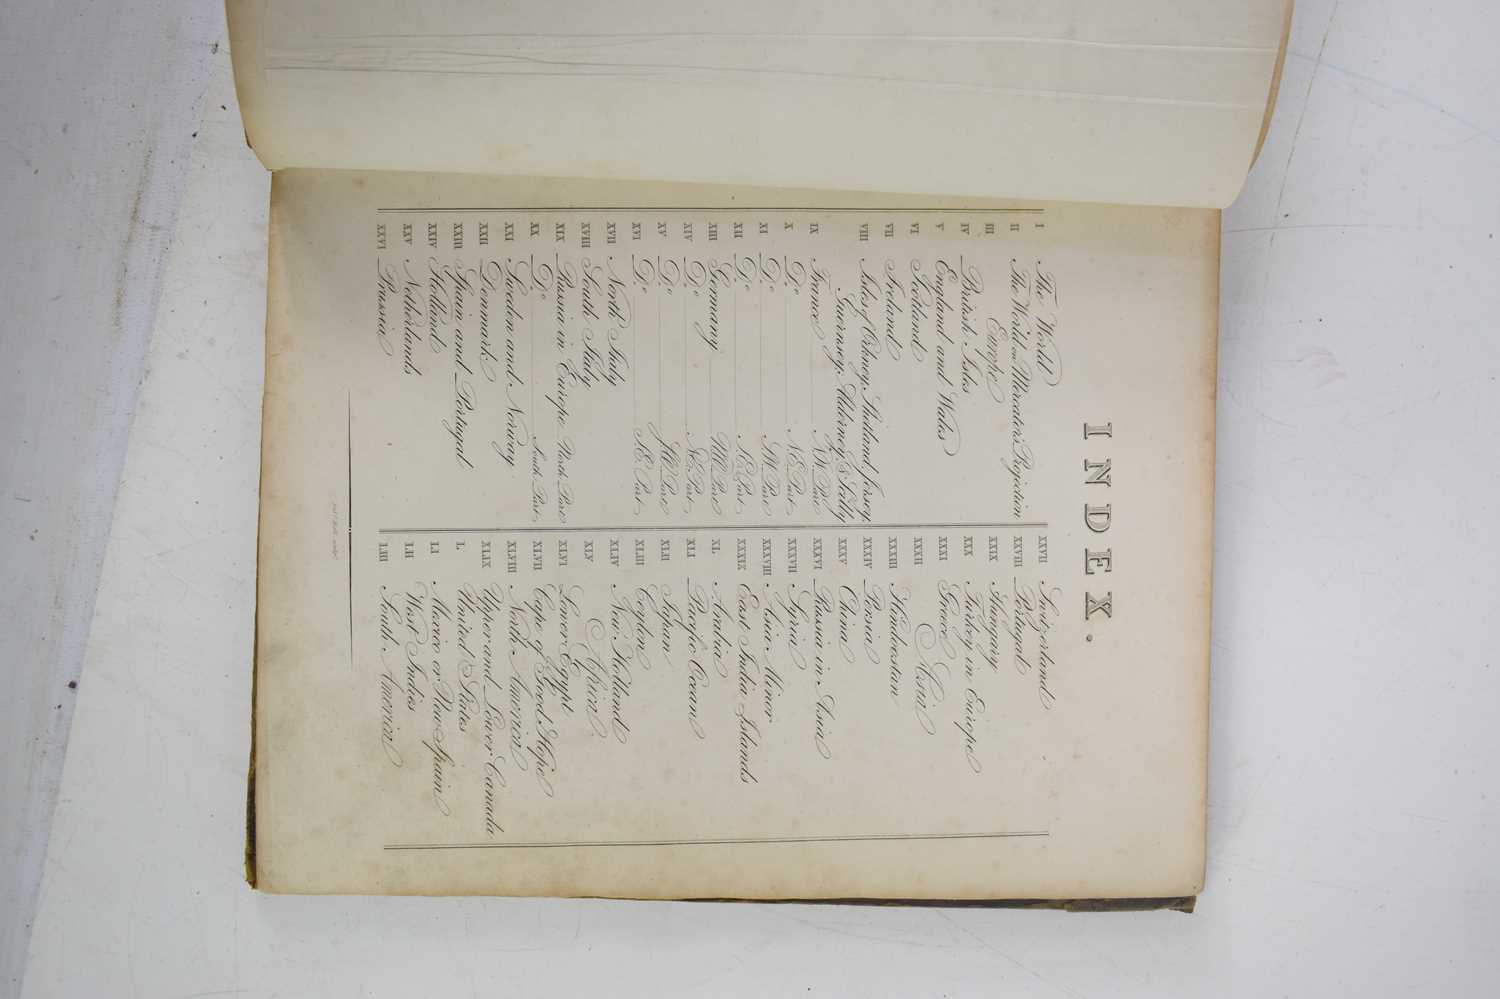 A 19th century New General Atlas, Constructed from the Latest Authorities, by Arrowsmith, - Image 6 of 6